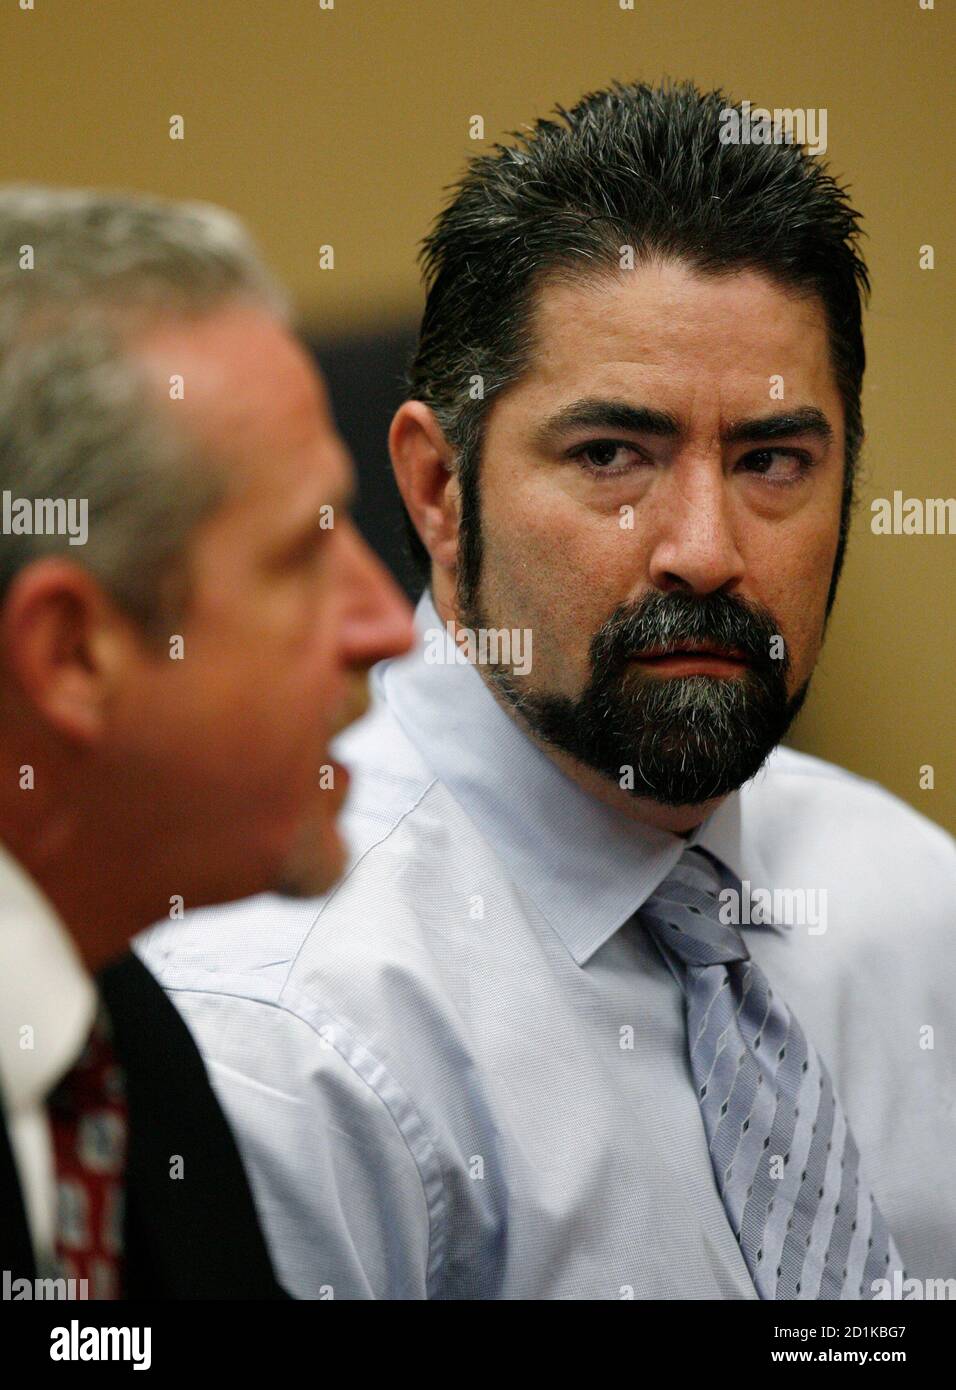 Raymond Lee Oyler (R) listens to his attorney Mark McDonald during his  appearance for a felony settlement conference in Riverside Superior Court  in Riverside, California, December 15, 2006. Oyler is accused of